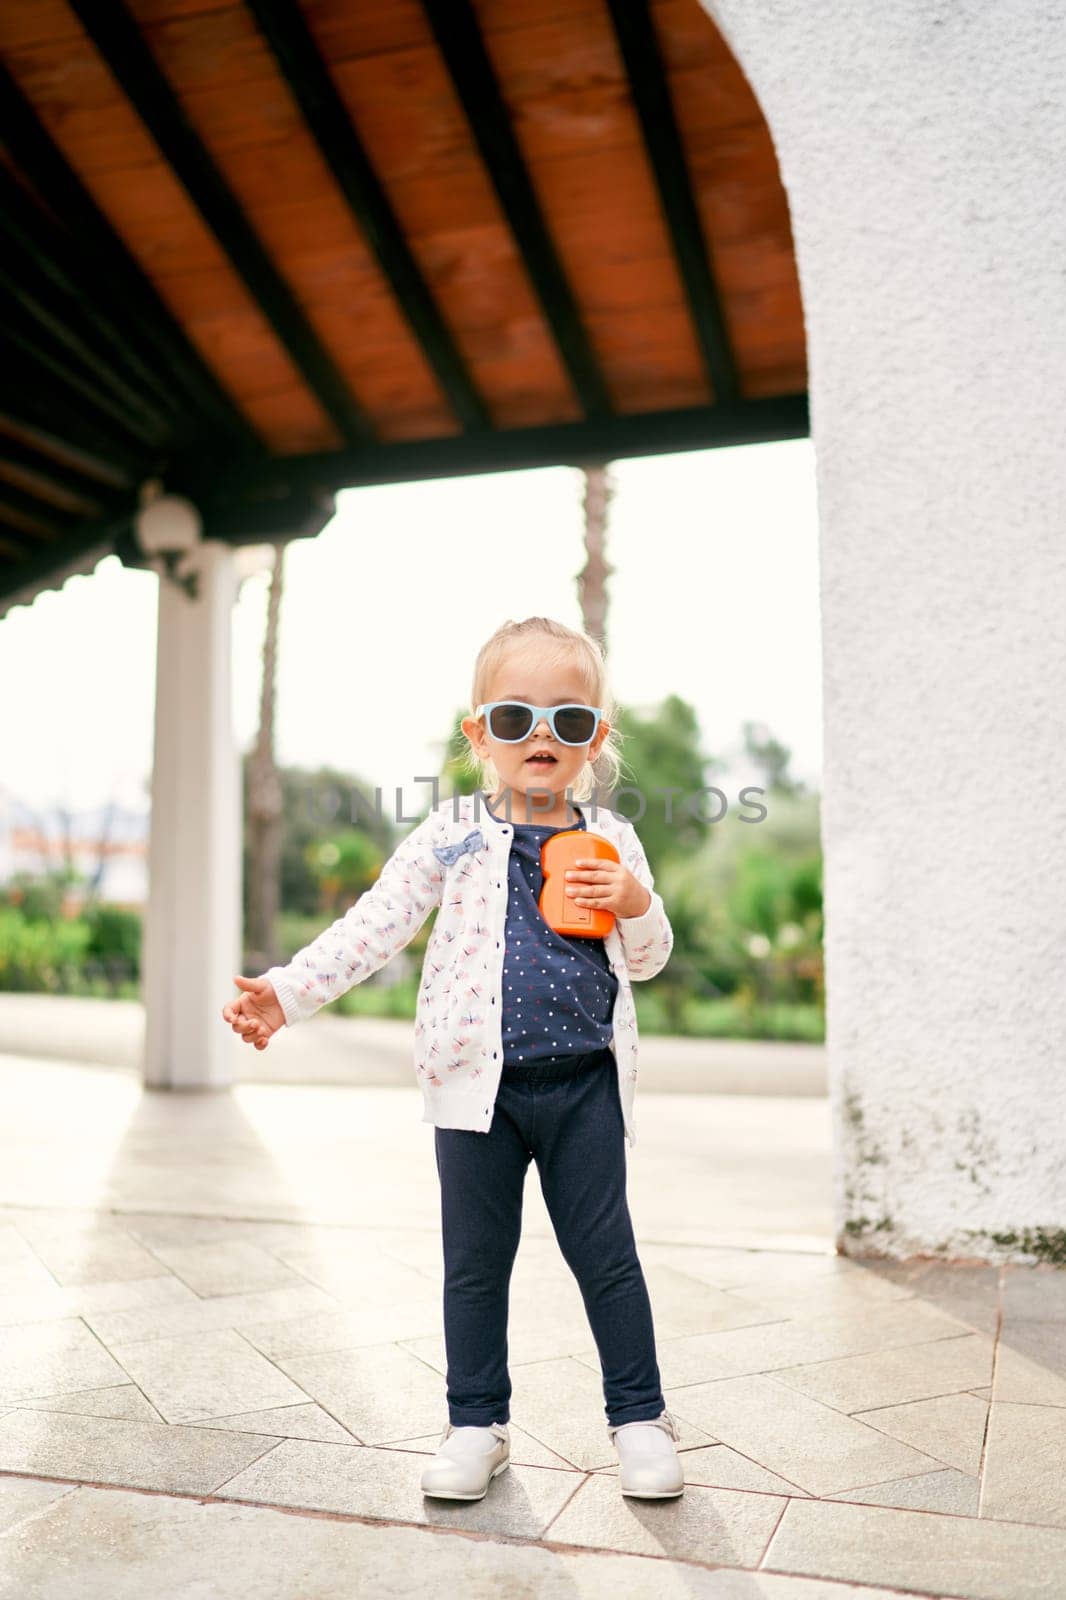 Little girl in sunglasses stands on a tile in a pergola in the garden. High quality photo